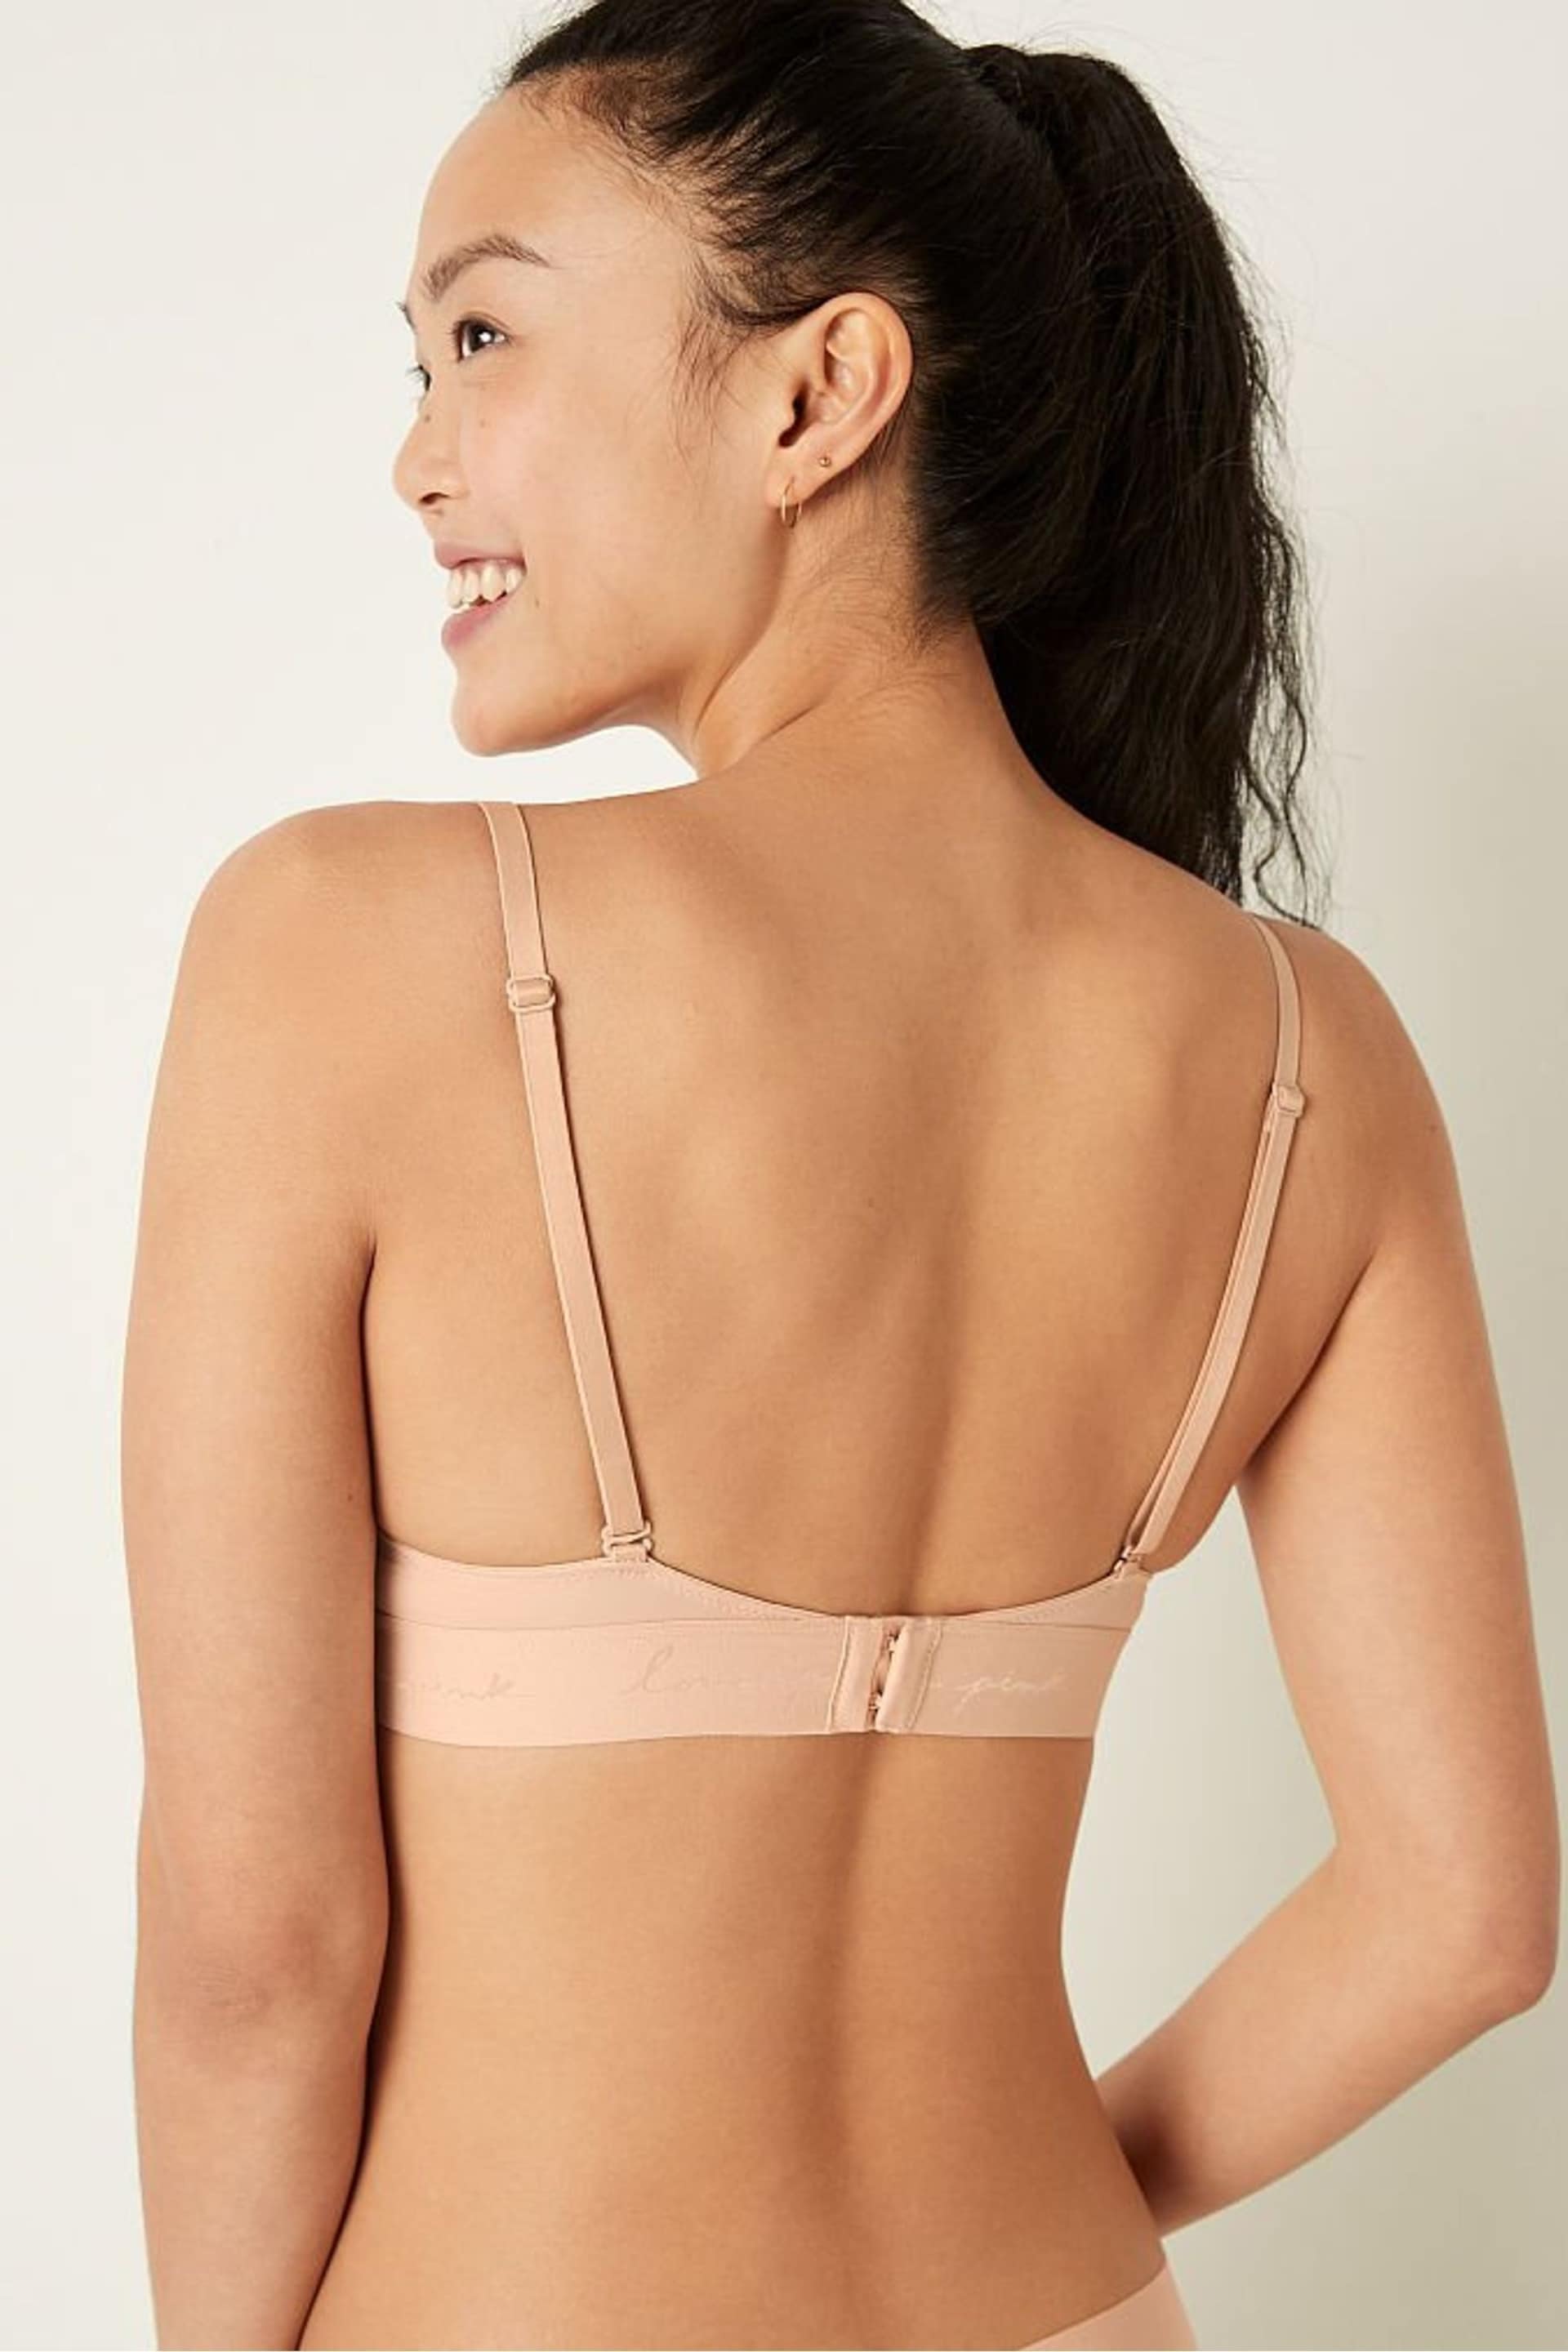 Victoria's Secret PINK Champagne Nude Non Wired Push Up Smooth T-Shirt Bra - Image 2 of 5